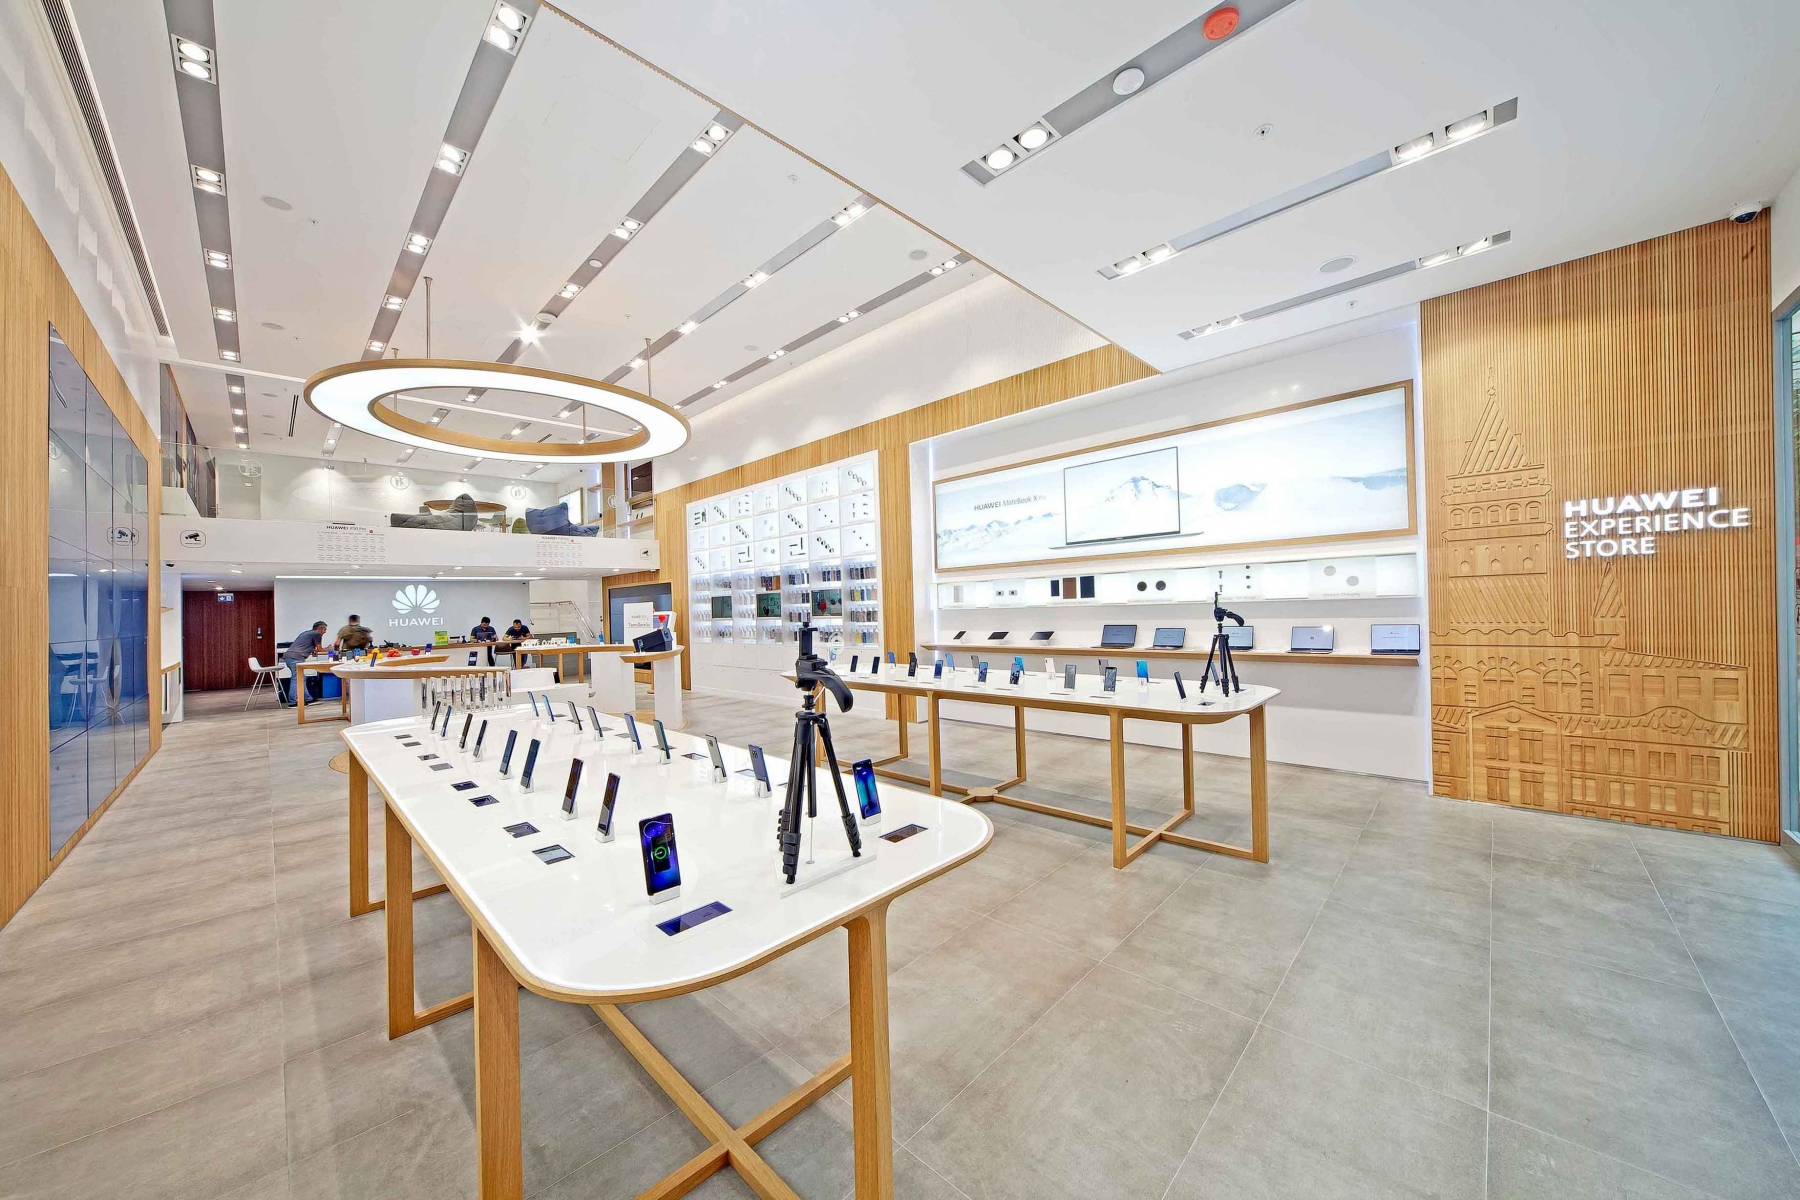 Huawei experience store